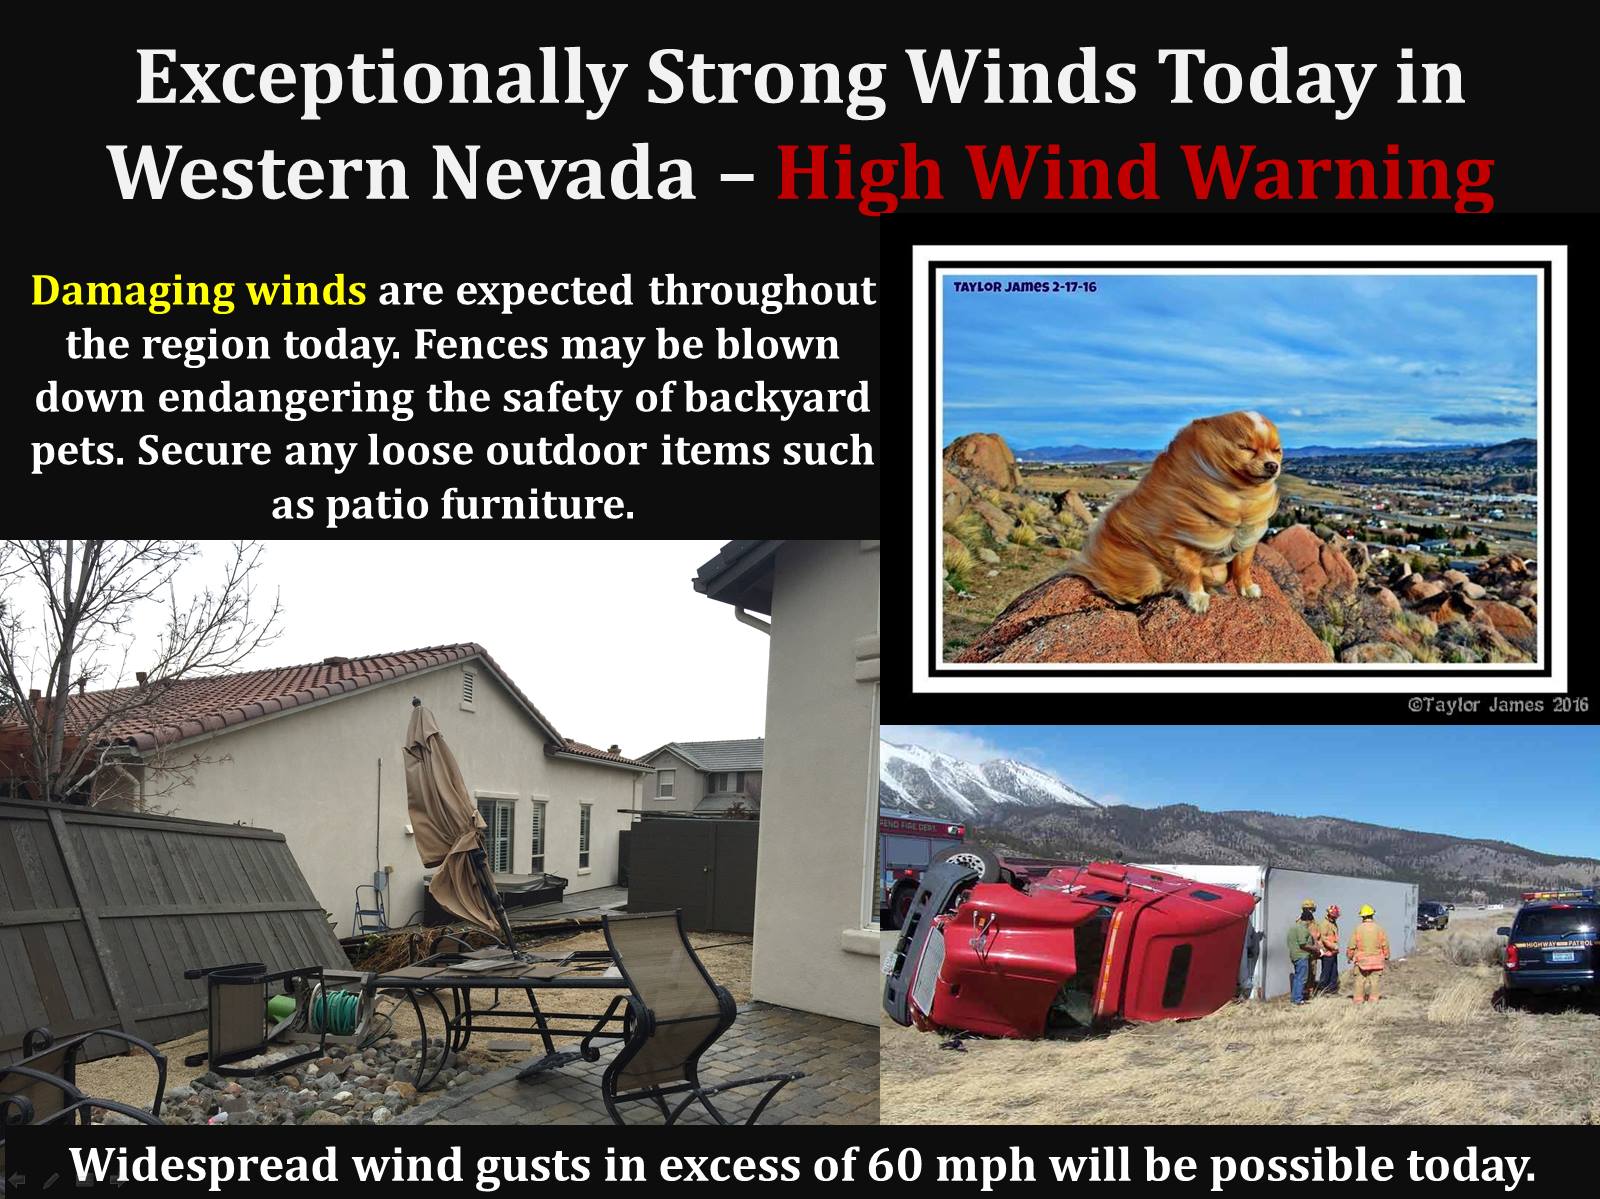 "Exceptionally Strong Winds Today in Western Nevada. Widespread wind gusts in excess of 60 mph will be possible today. " - NOAA Reno, NV today